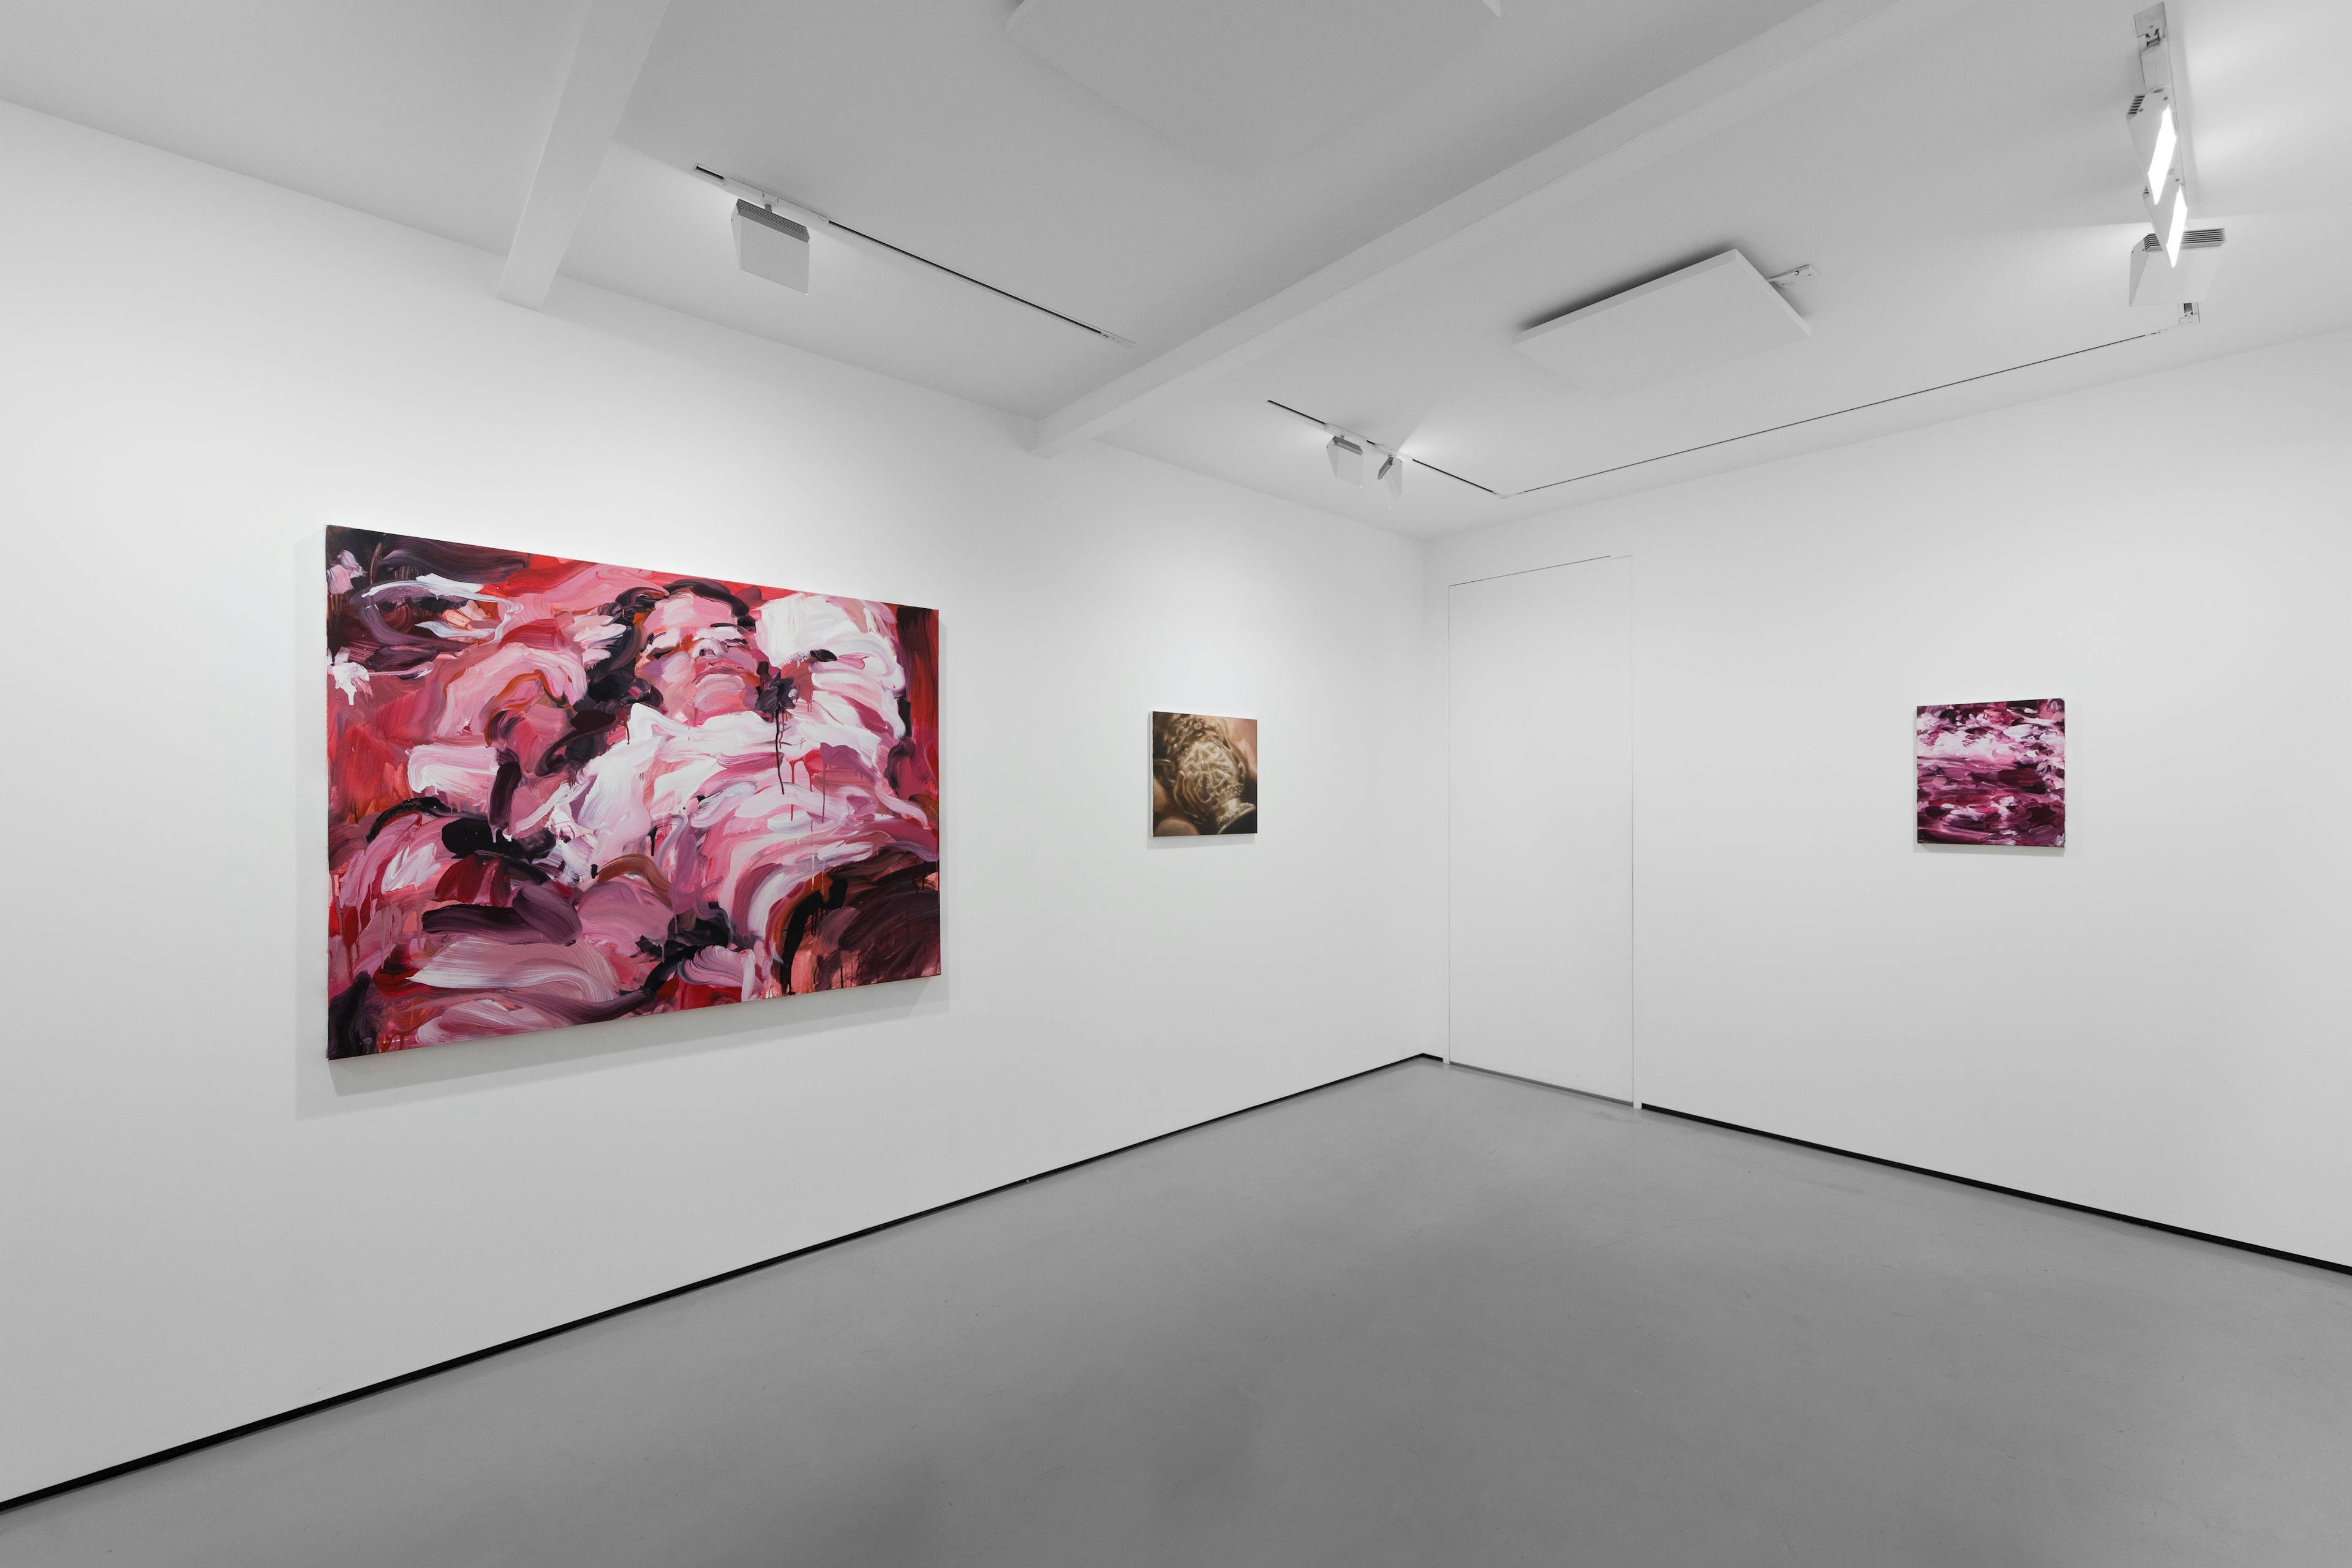 Installation shots of 'Cadence' by Laura Lancaster and Rachel Lancaster at Workplace | London